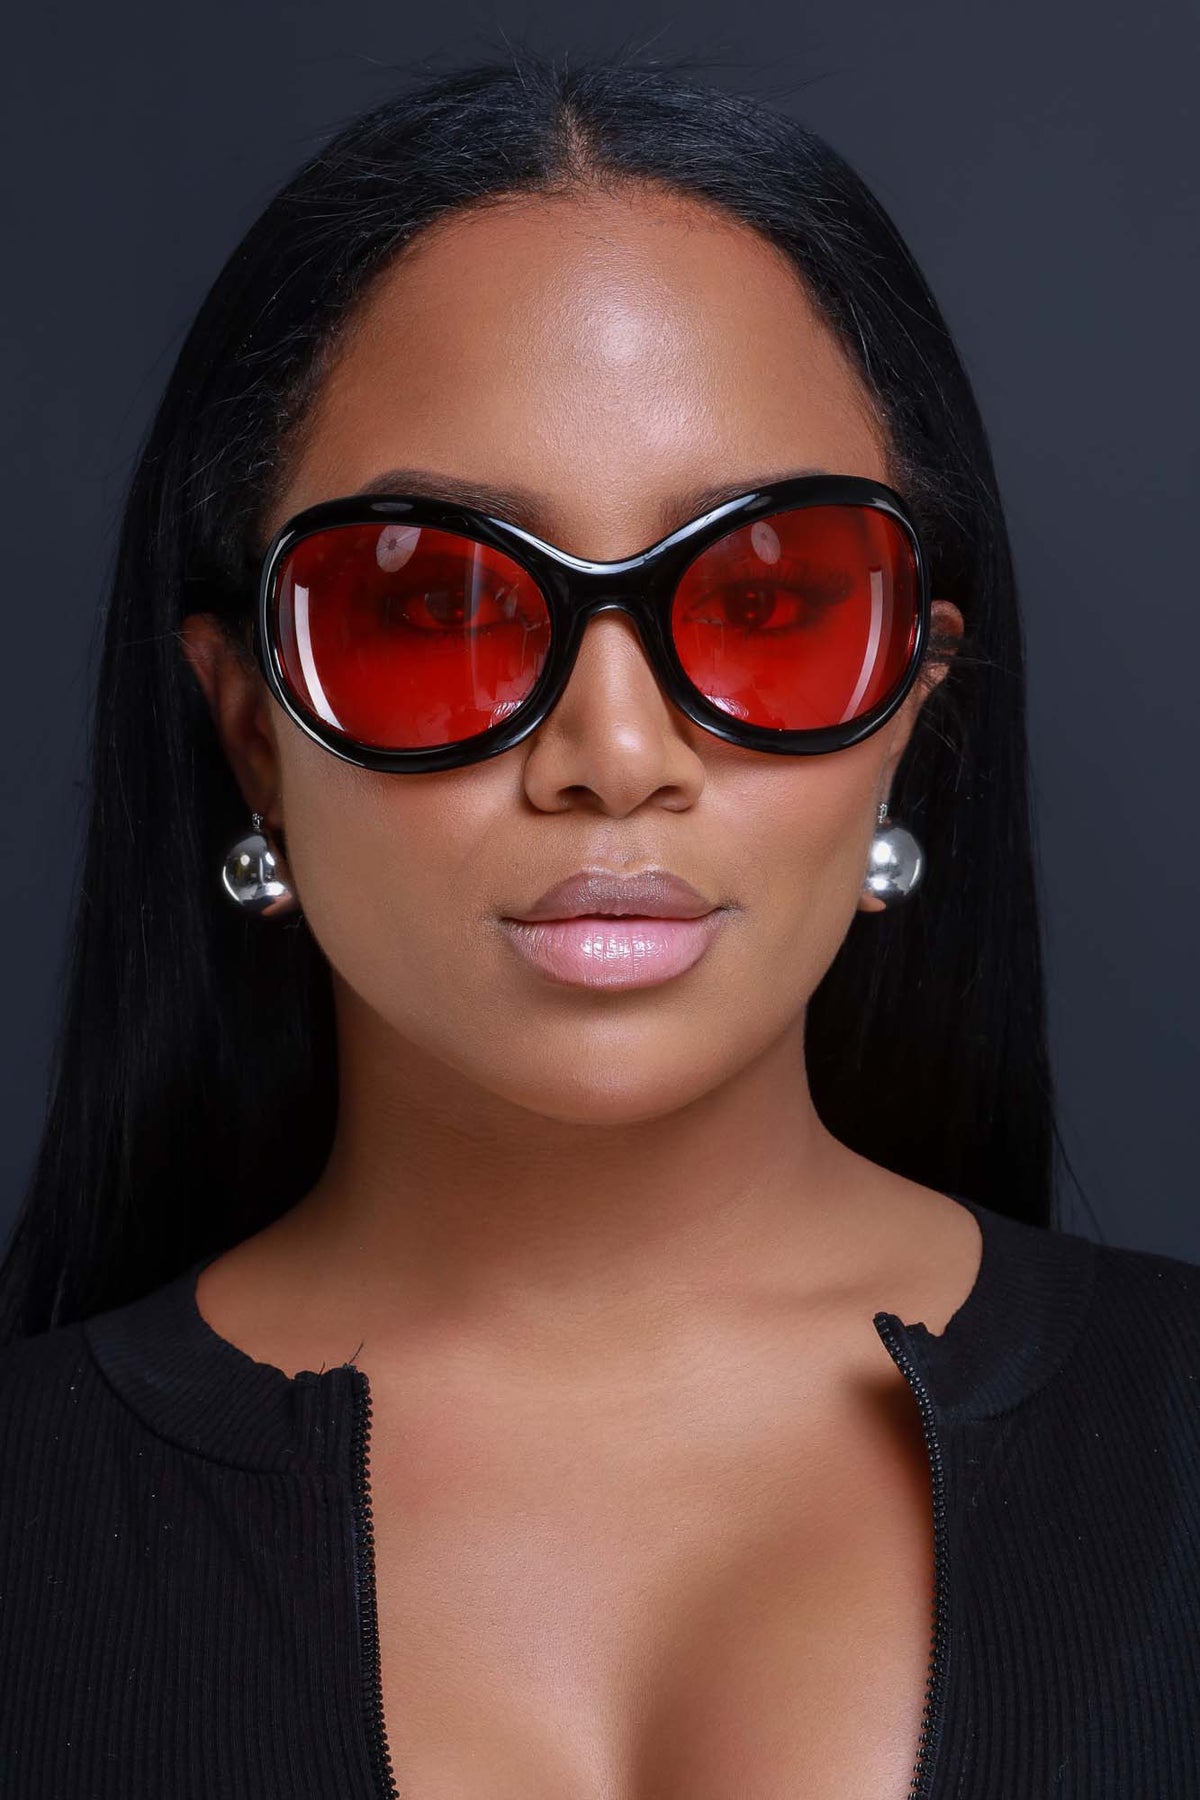 
              Take A Chance Retro Rounded Sunglasses - Black/Red - Swank A Posh
            